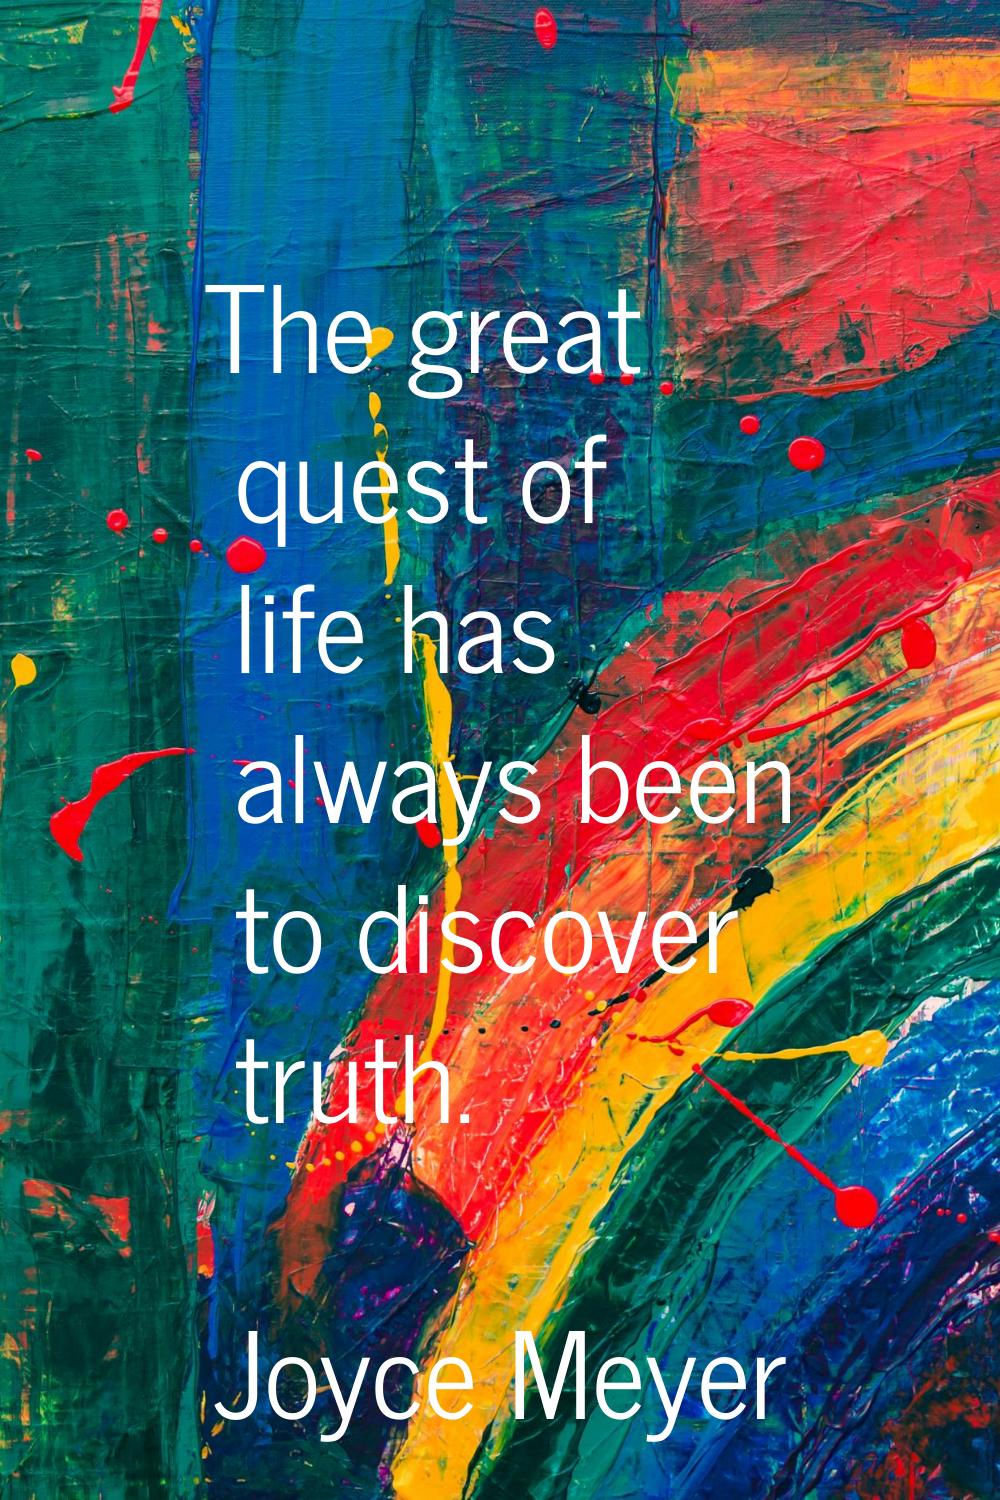 The great quest of life has always been to discover truth.